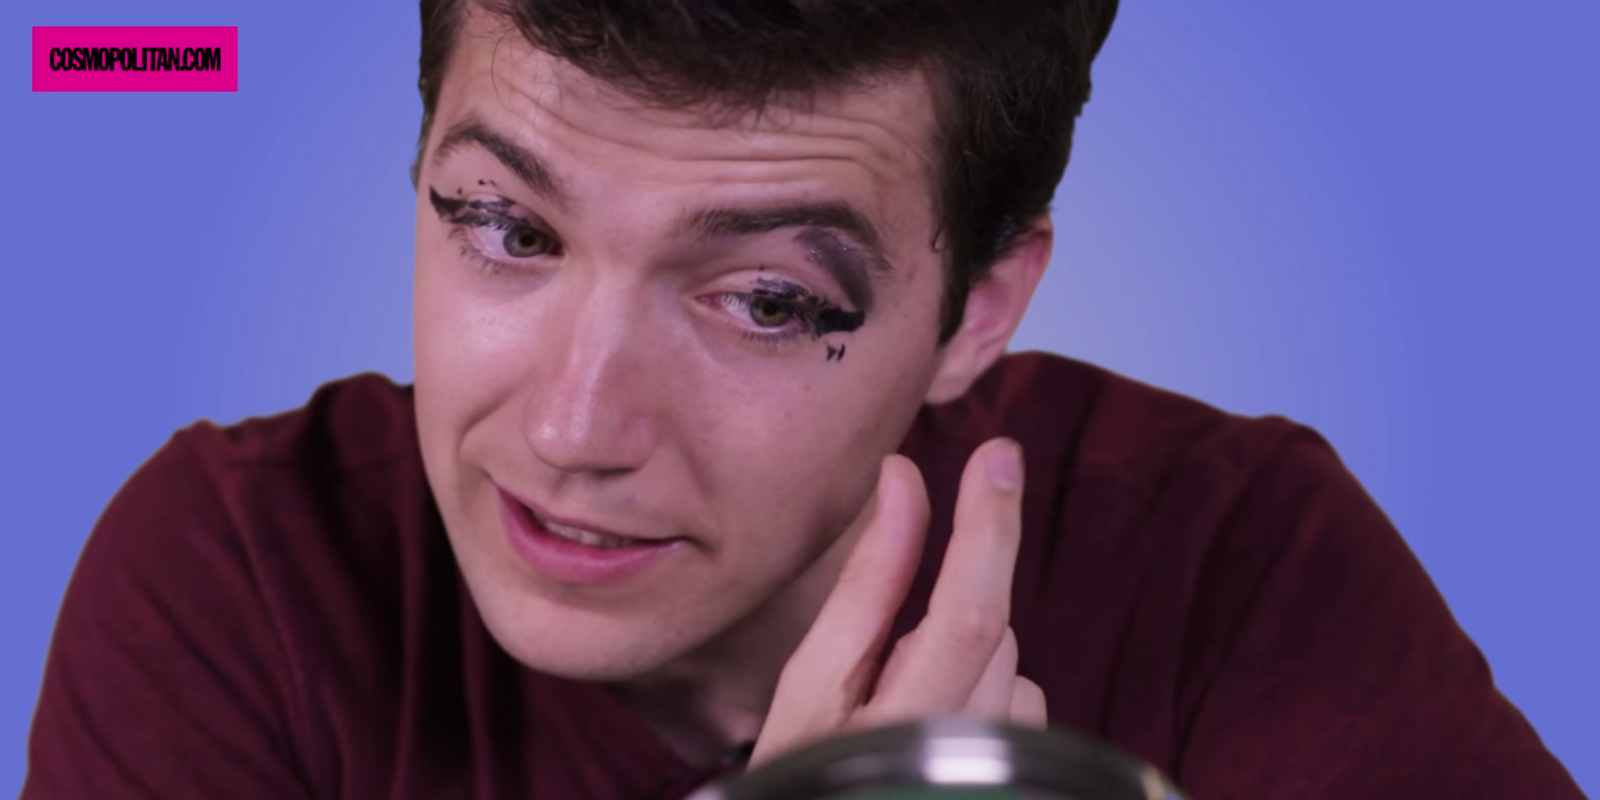 Men Try To Apply Cat Eye Makeup And Fail Miserably